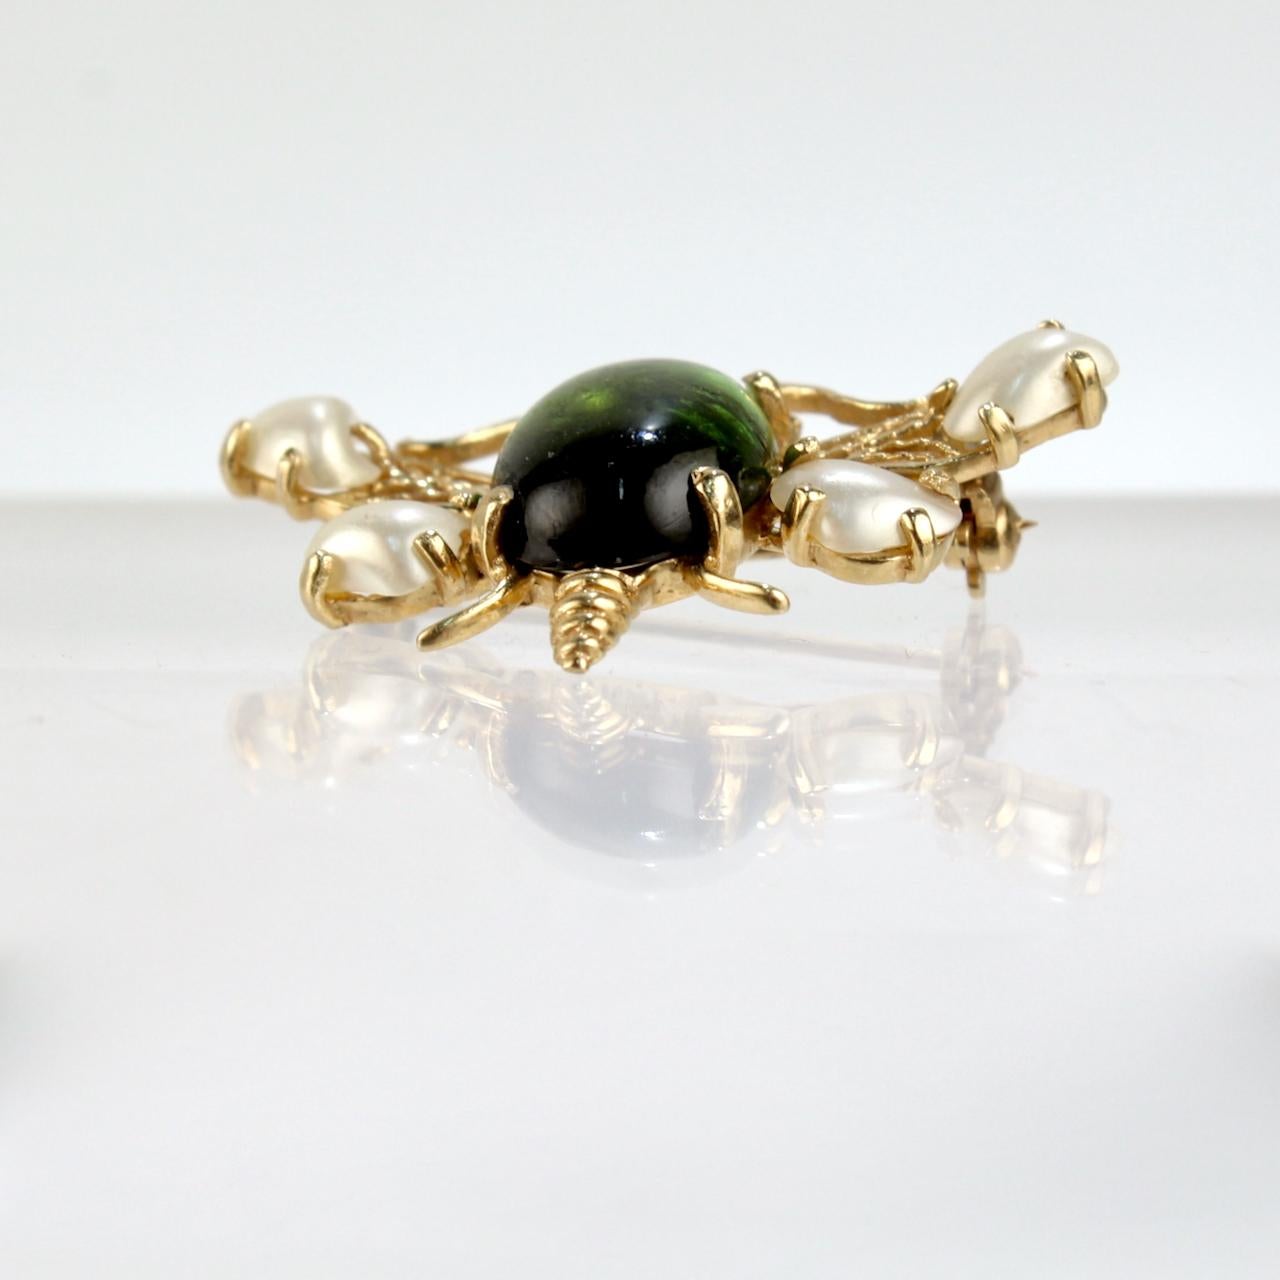 Women's or Men's 14 Karat Gold and Green Tourmaline Kinetic Bee Brooch with Pearls and Rubies For Sale